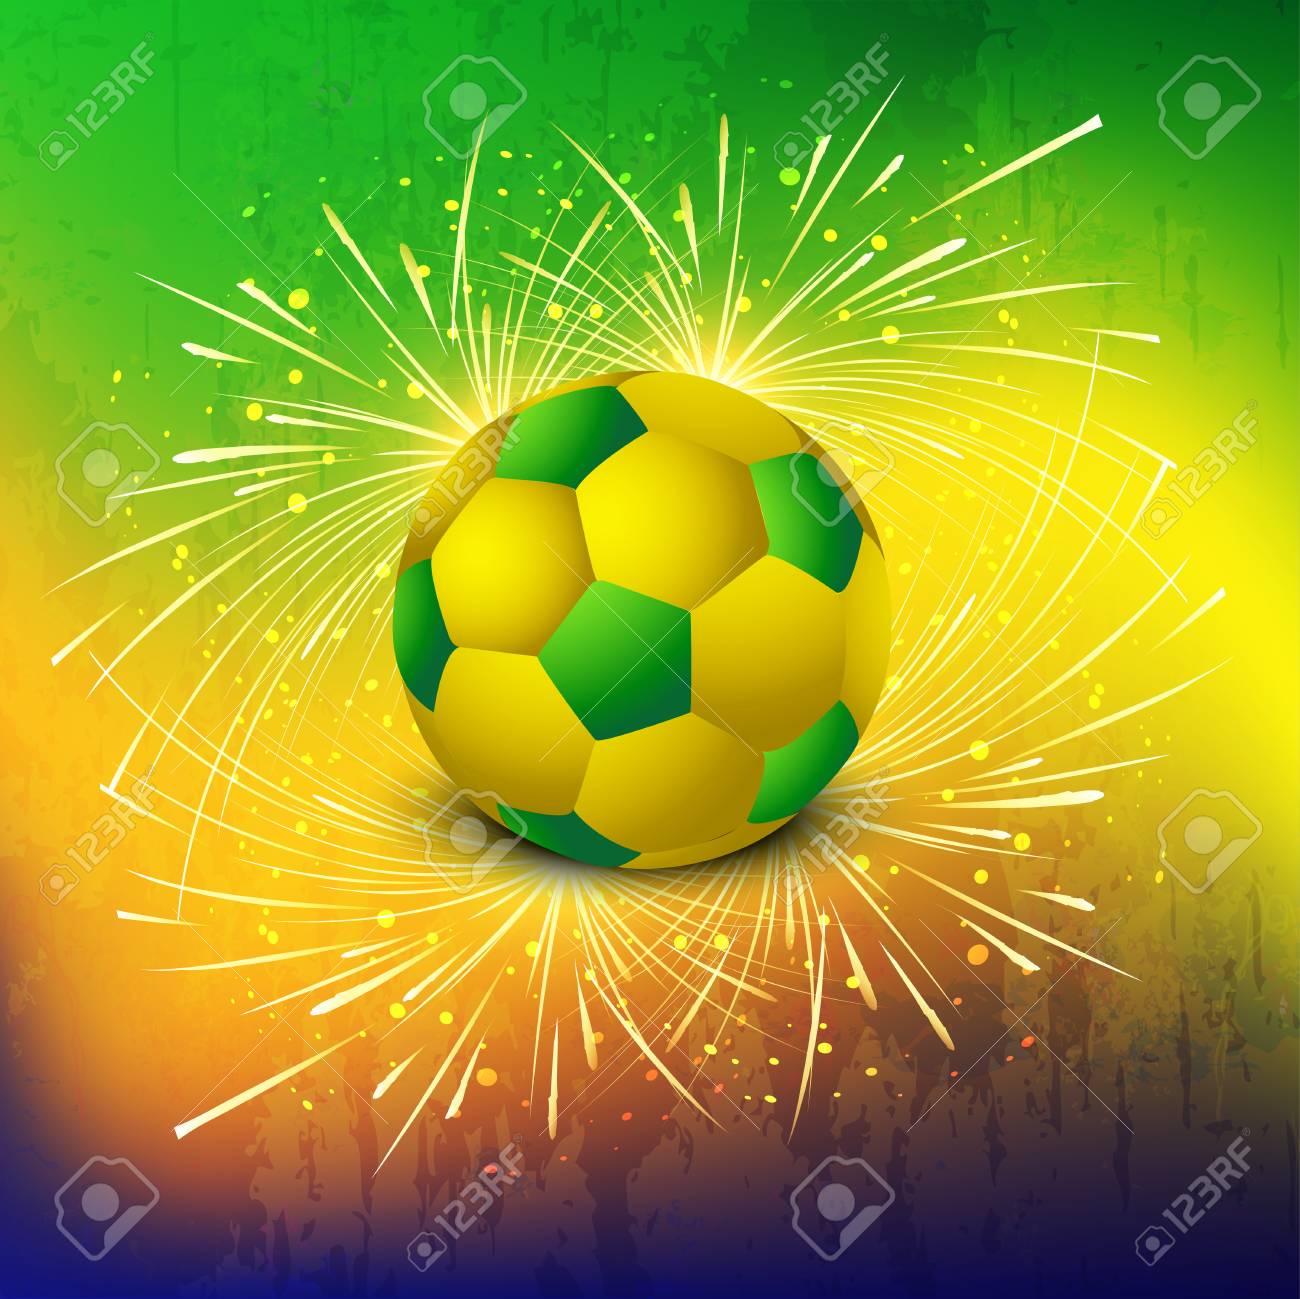 Soccer Ball With Brasil Colors Concept Celebration Background